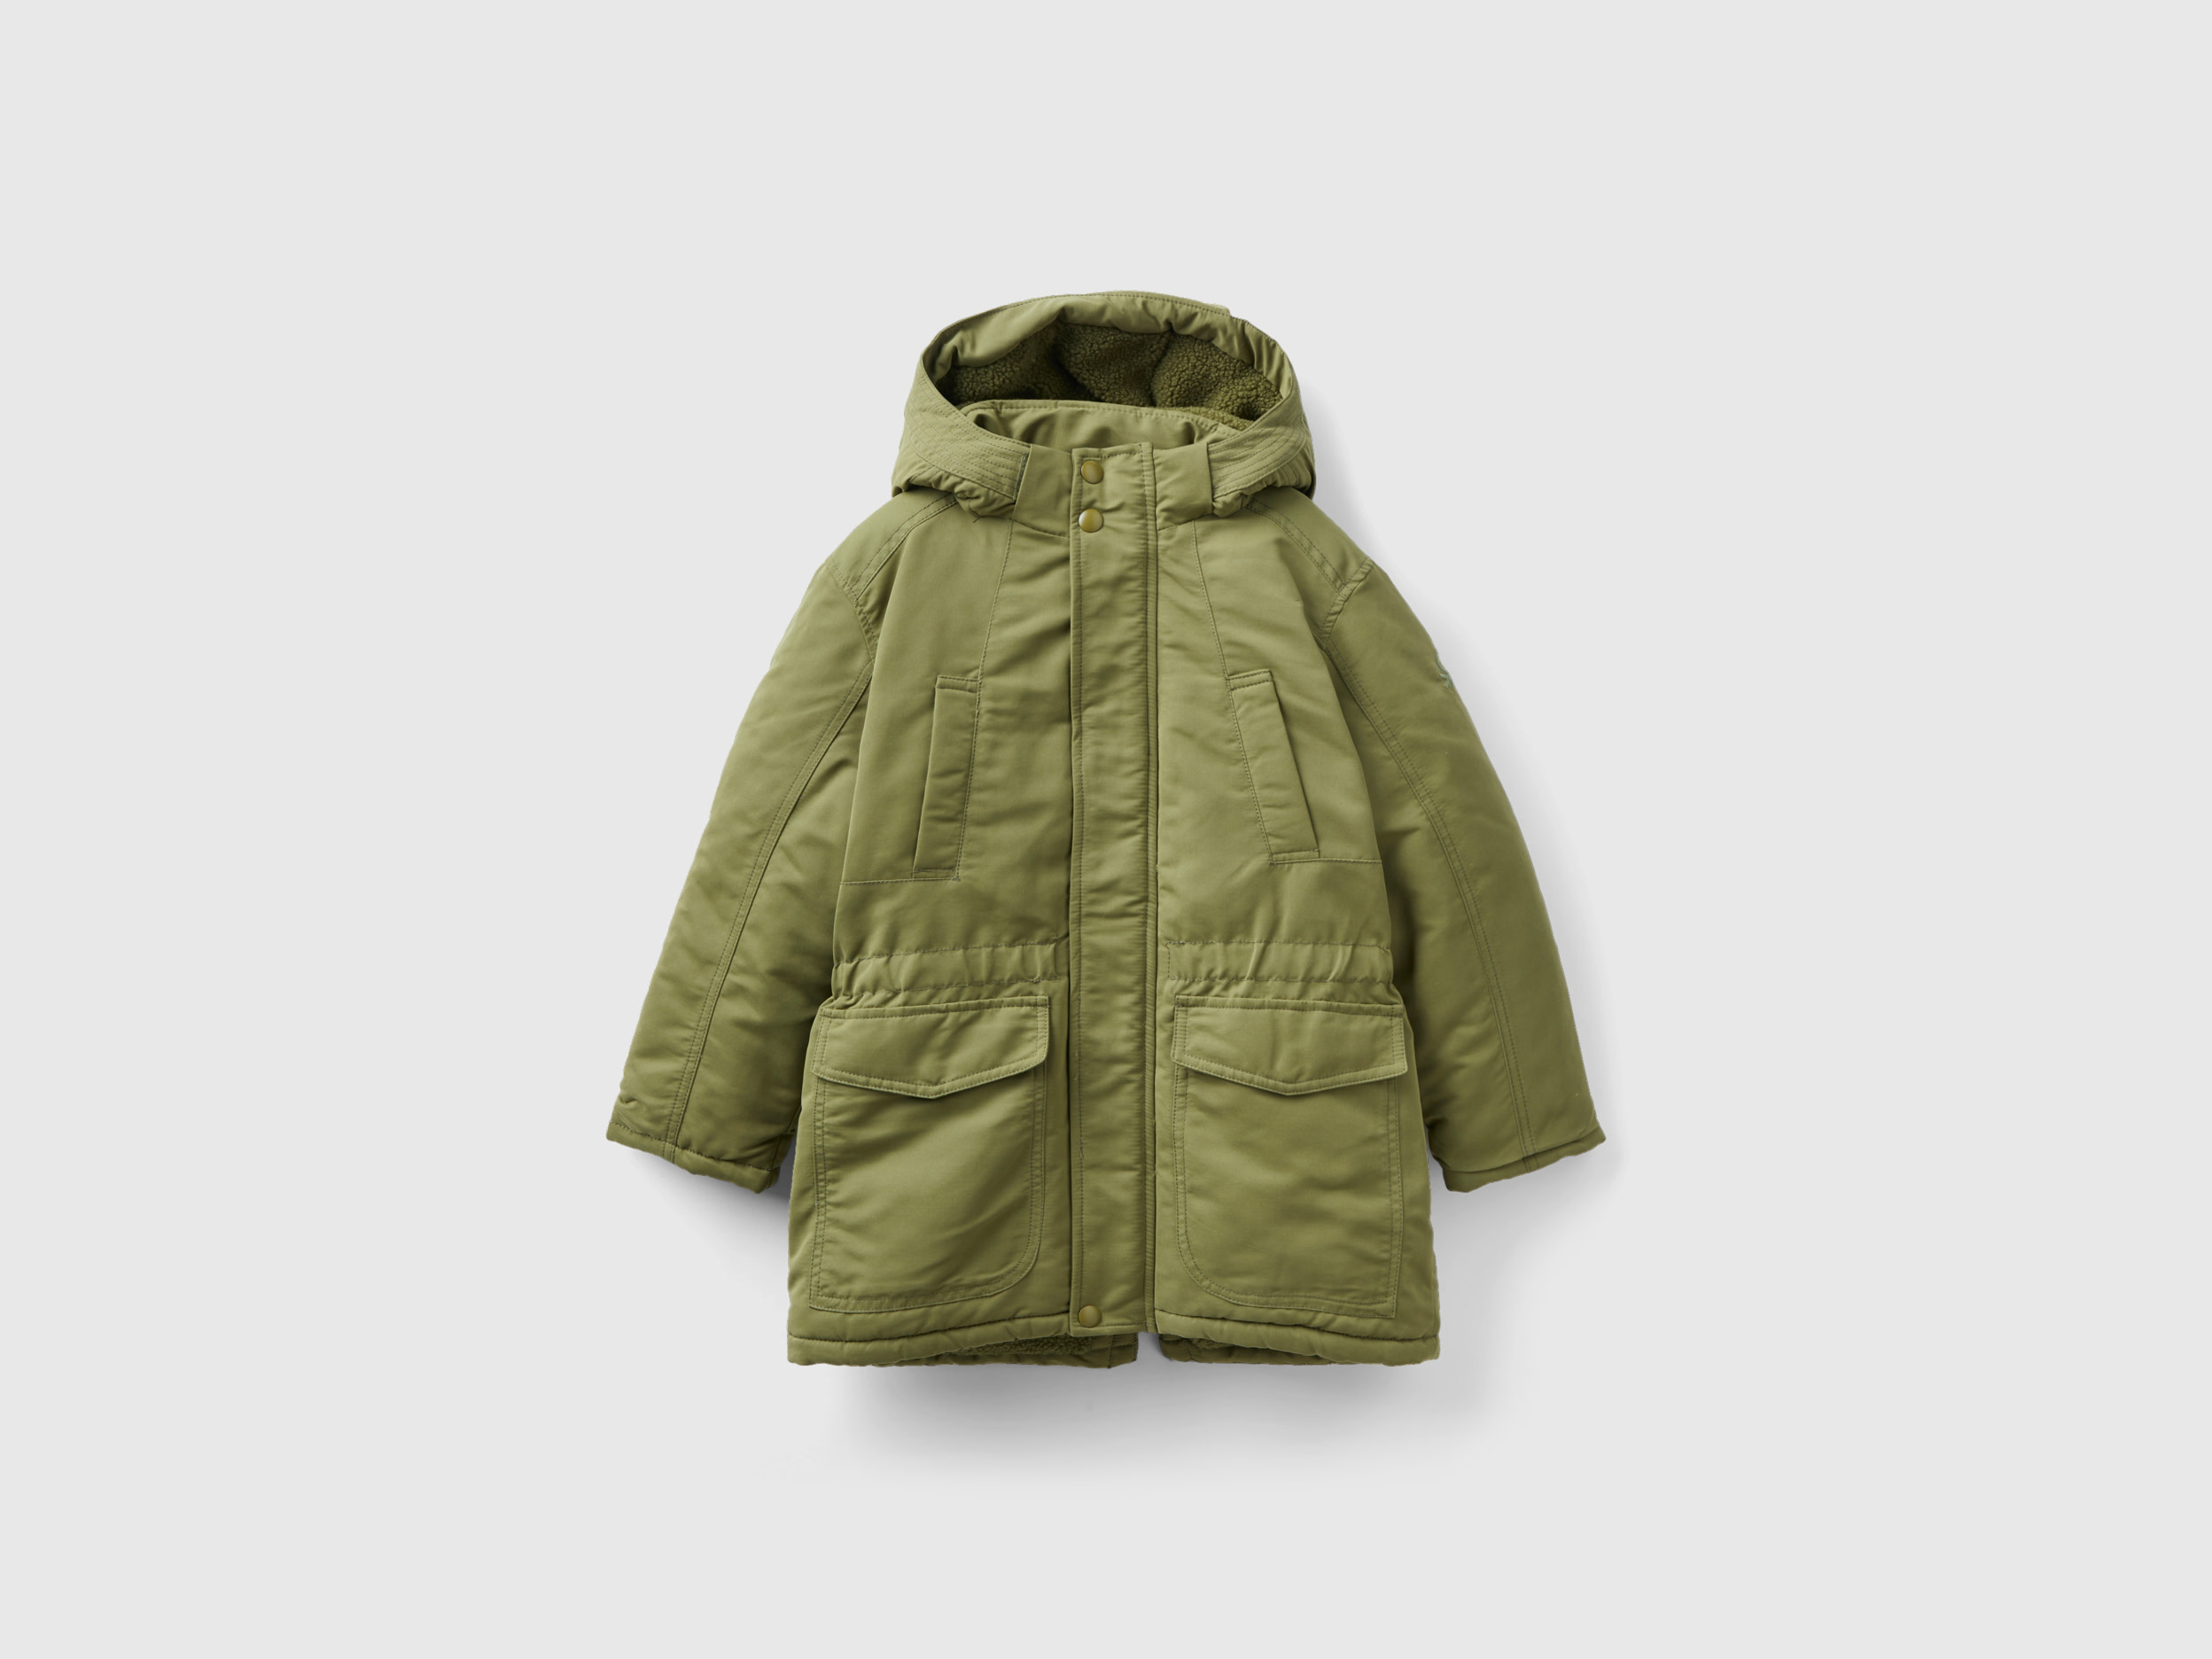 Benetton, Padded Parka With Pockets, size 2XL, Military Green, Kids